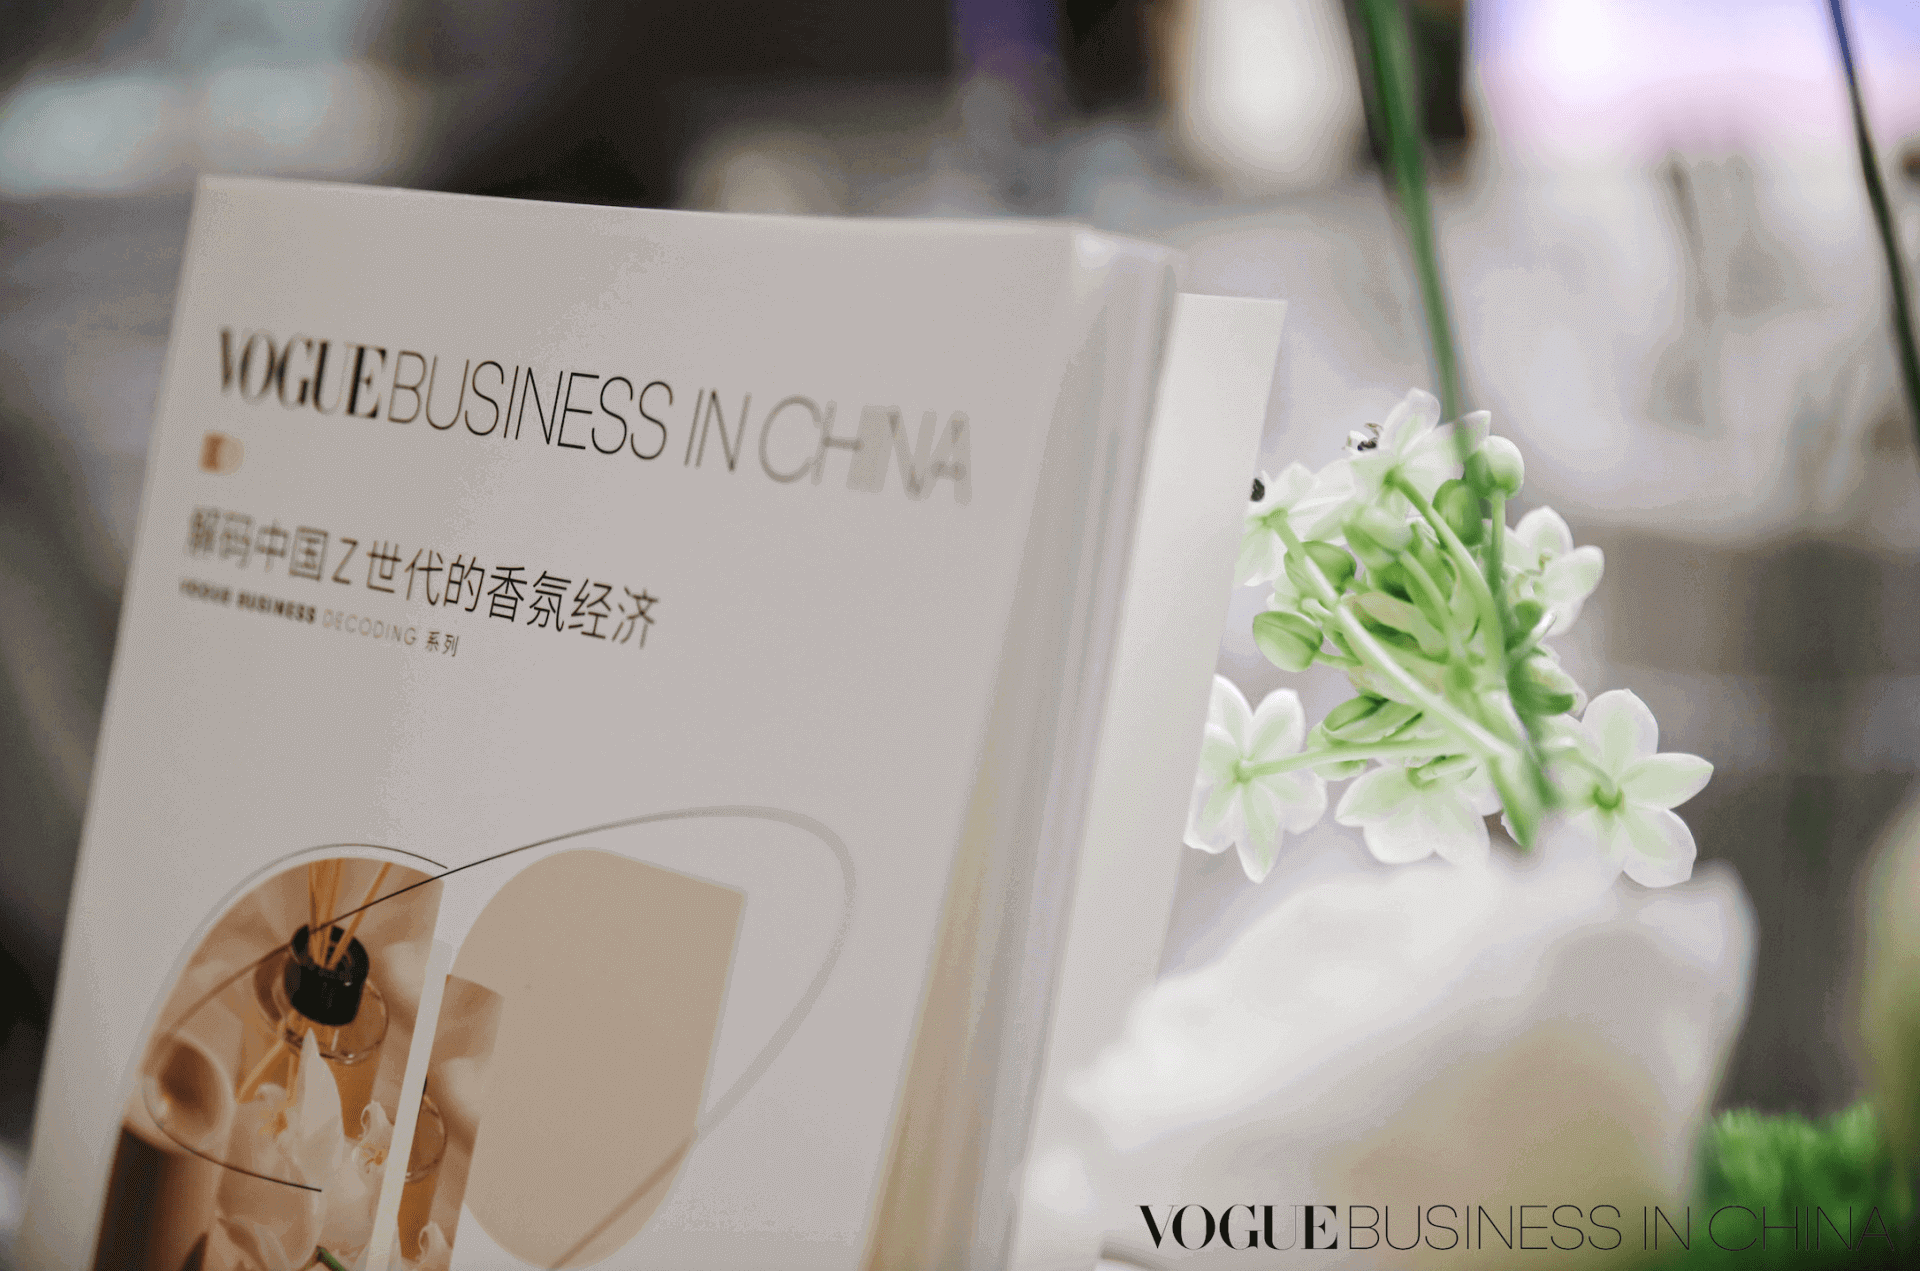 Labbrand Shanghai Shares Chinese Gen-Z Consumer Fragrance Consumption Insights at VOGUE BUSINESS